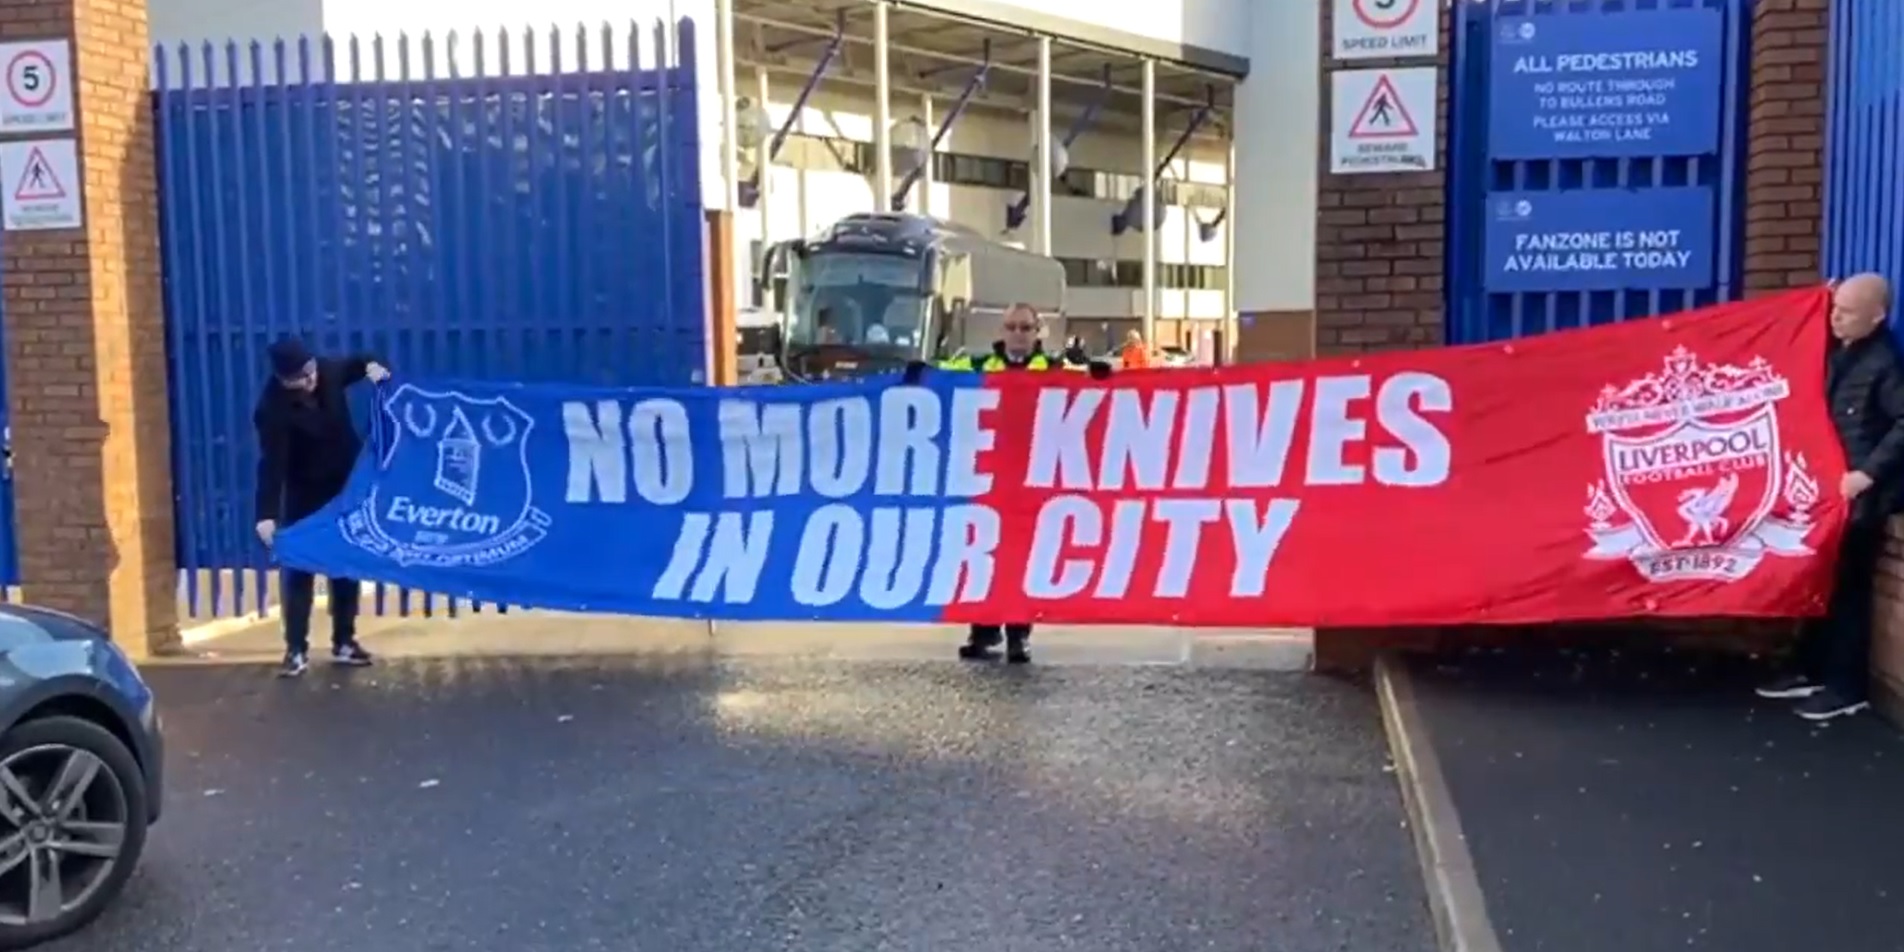 (Video) Liverpool and Everton fans prepare anti-knives banner after Ava White’s death ahead of Merseyside derby